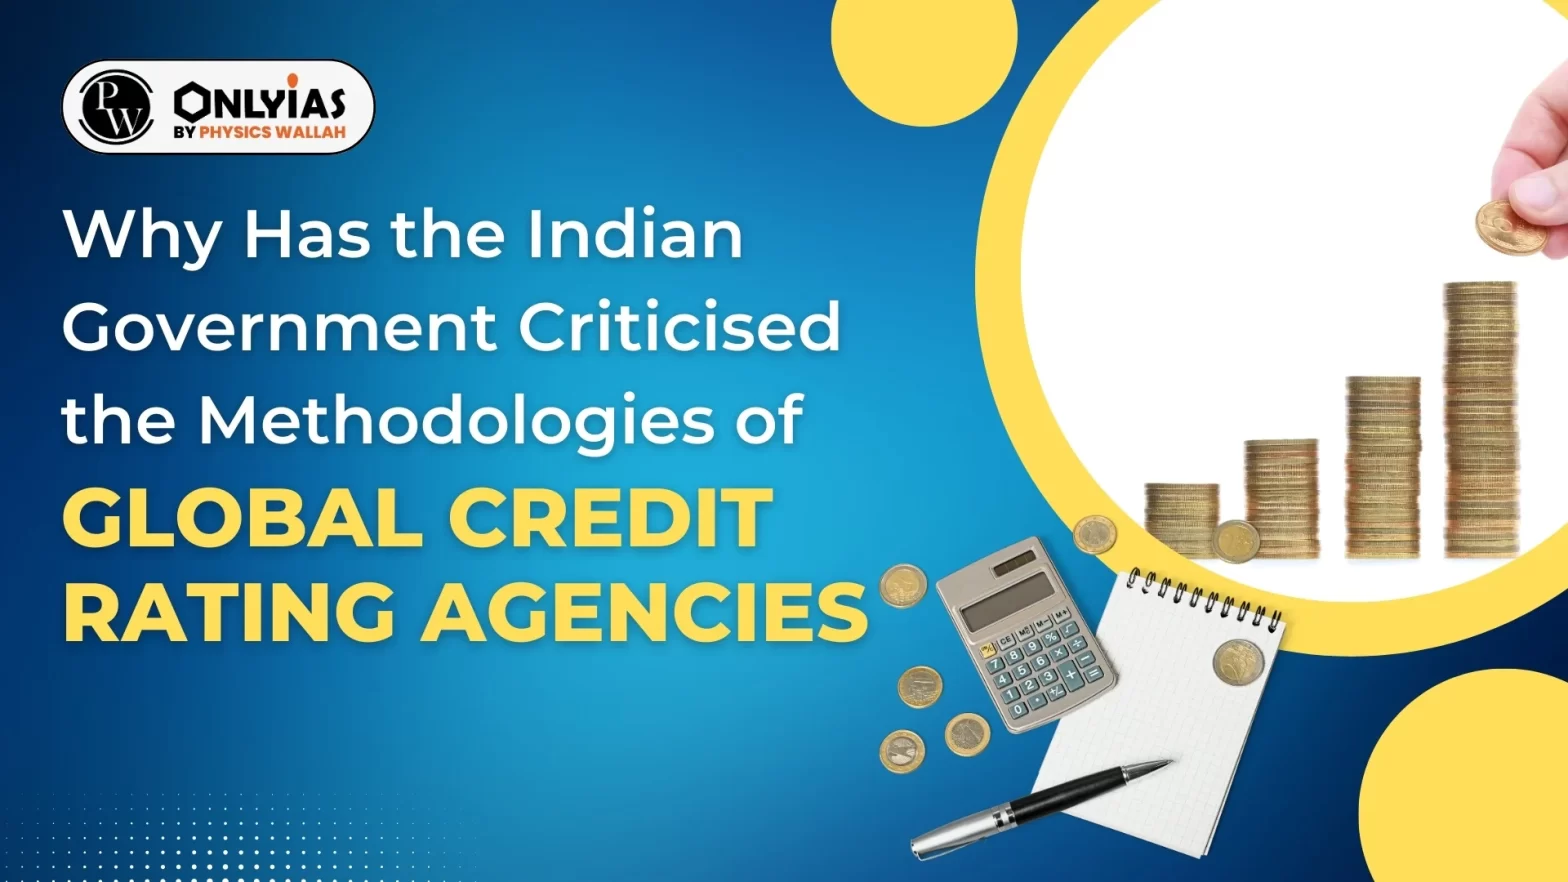 Why Has the Indian Government Criticised the Methodologies of Global Credit Rating Agencies